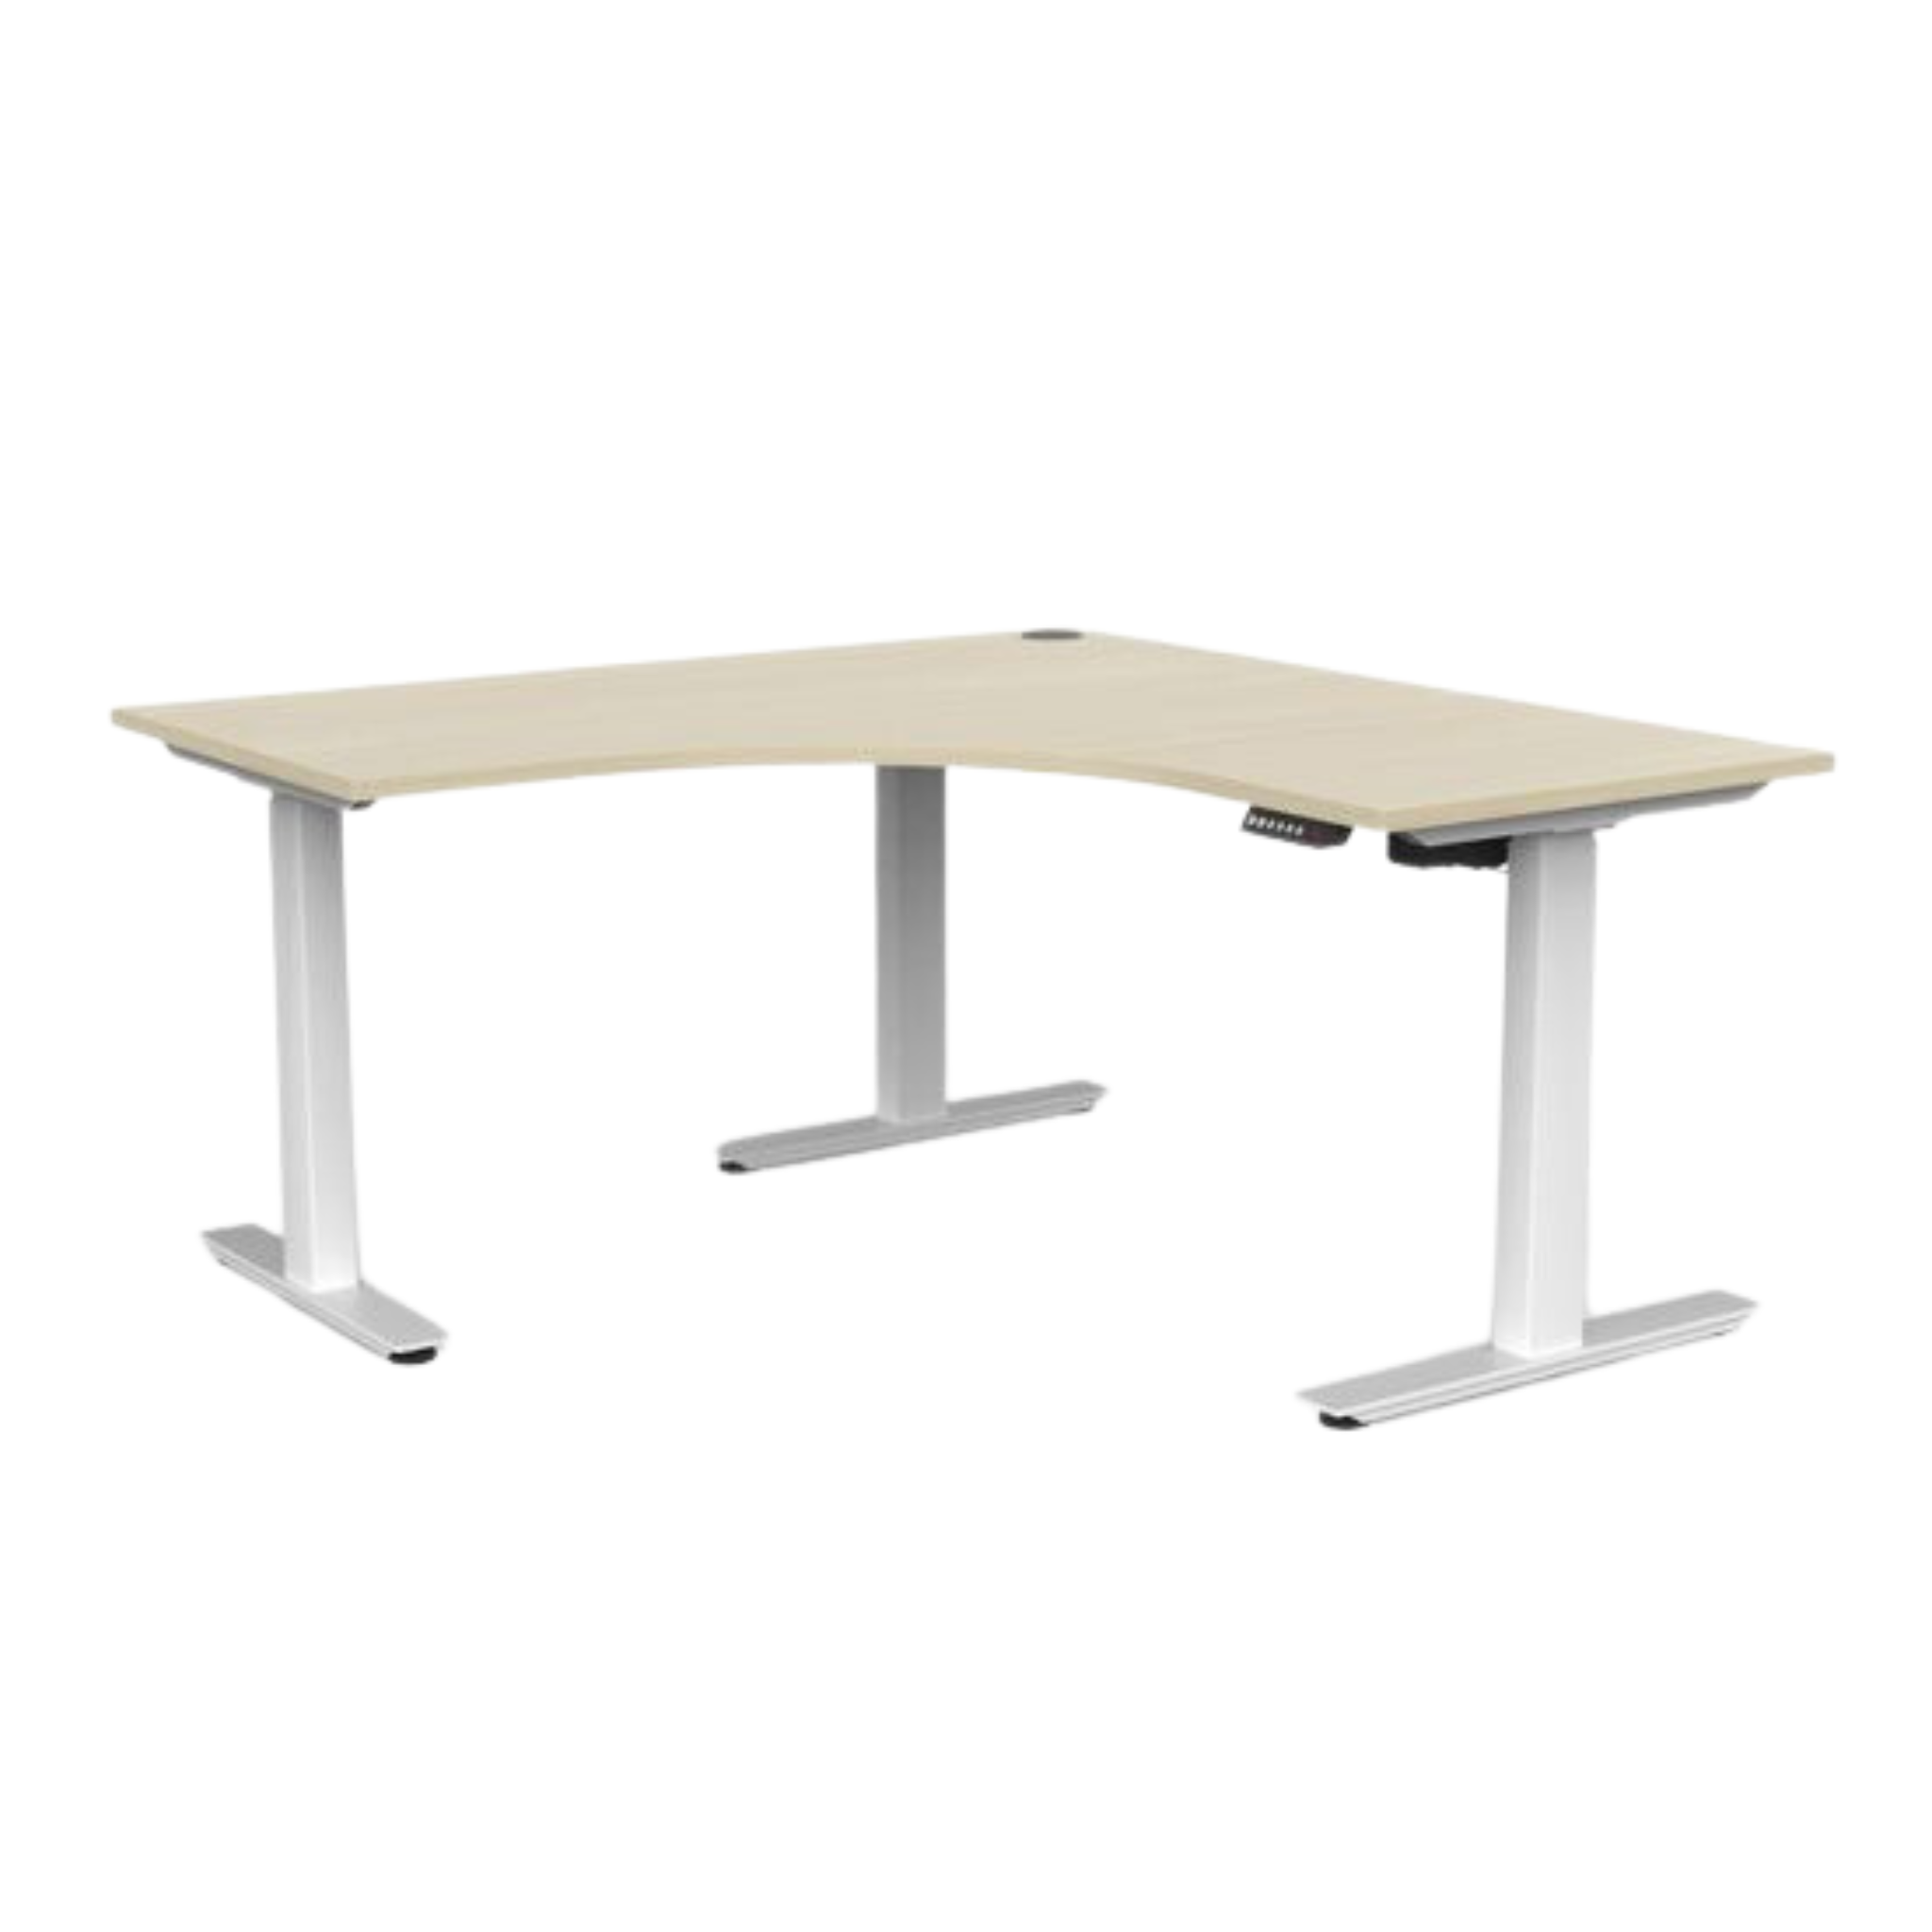 Agile 2 corner workstation with white frame and nordic maple top